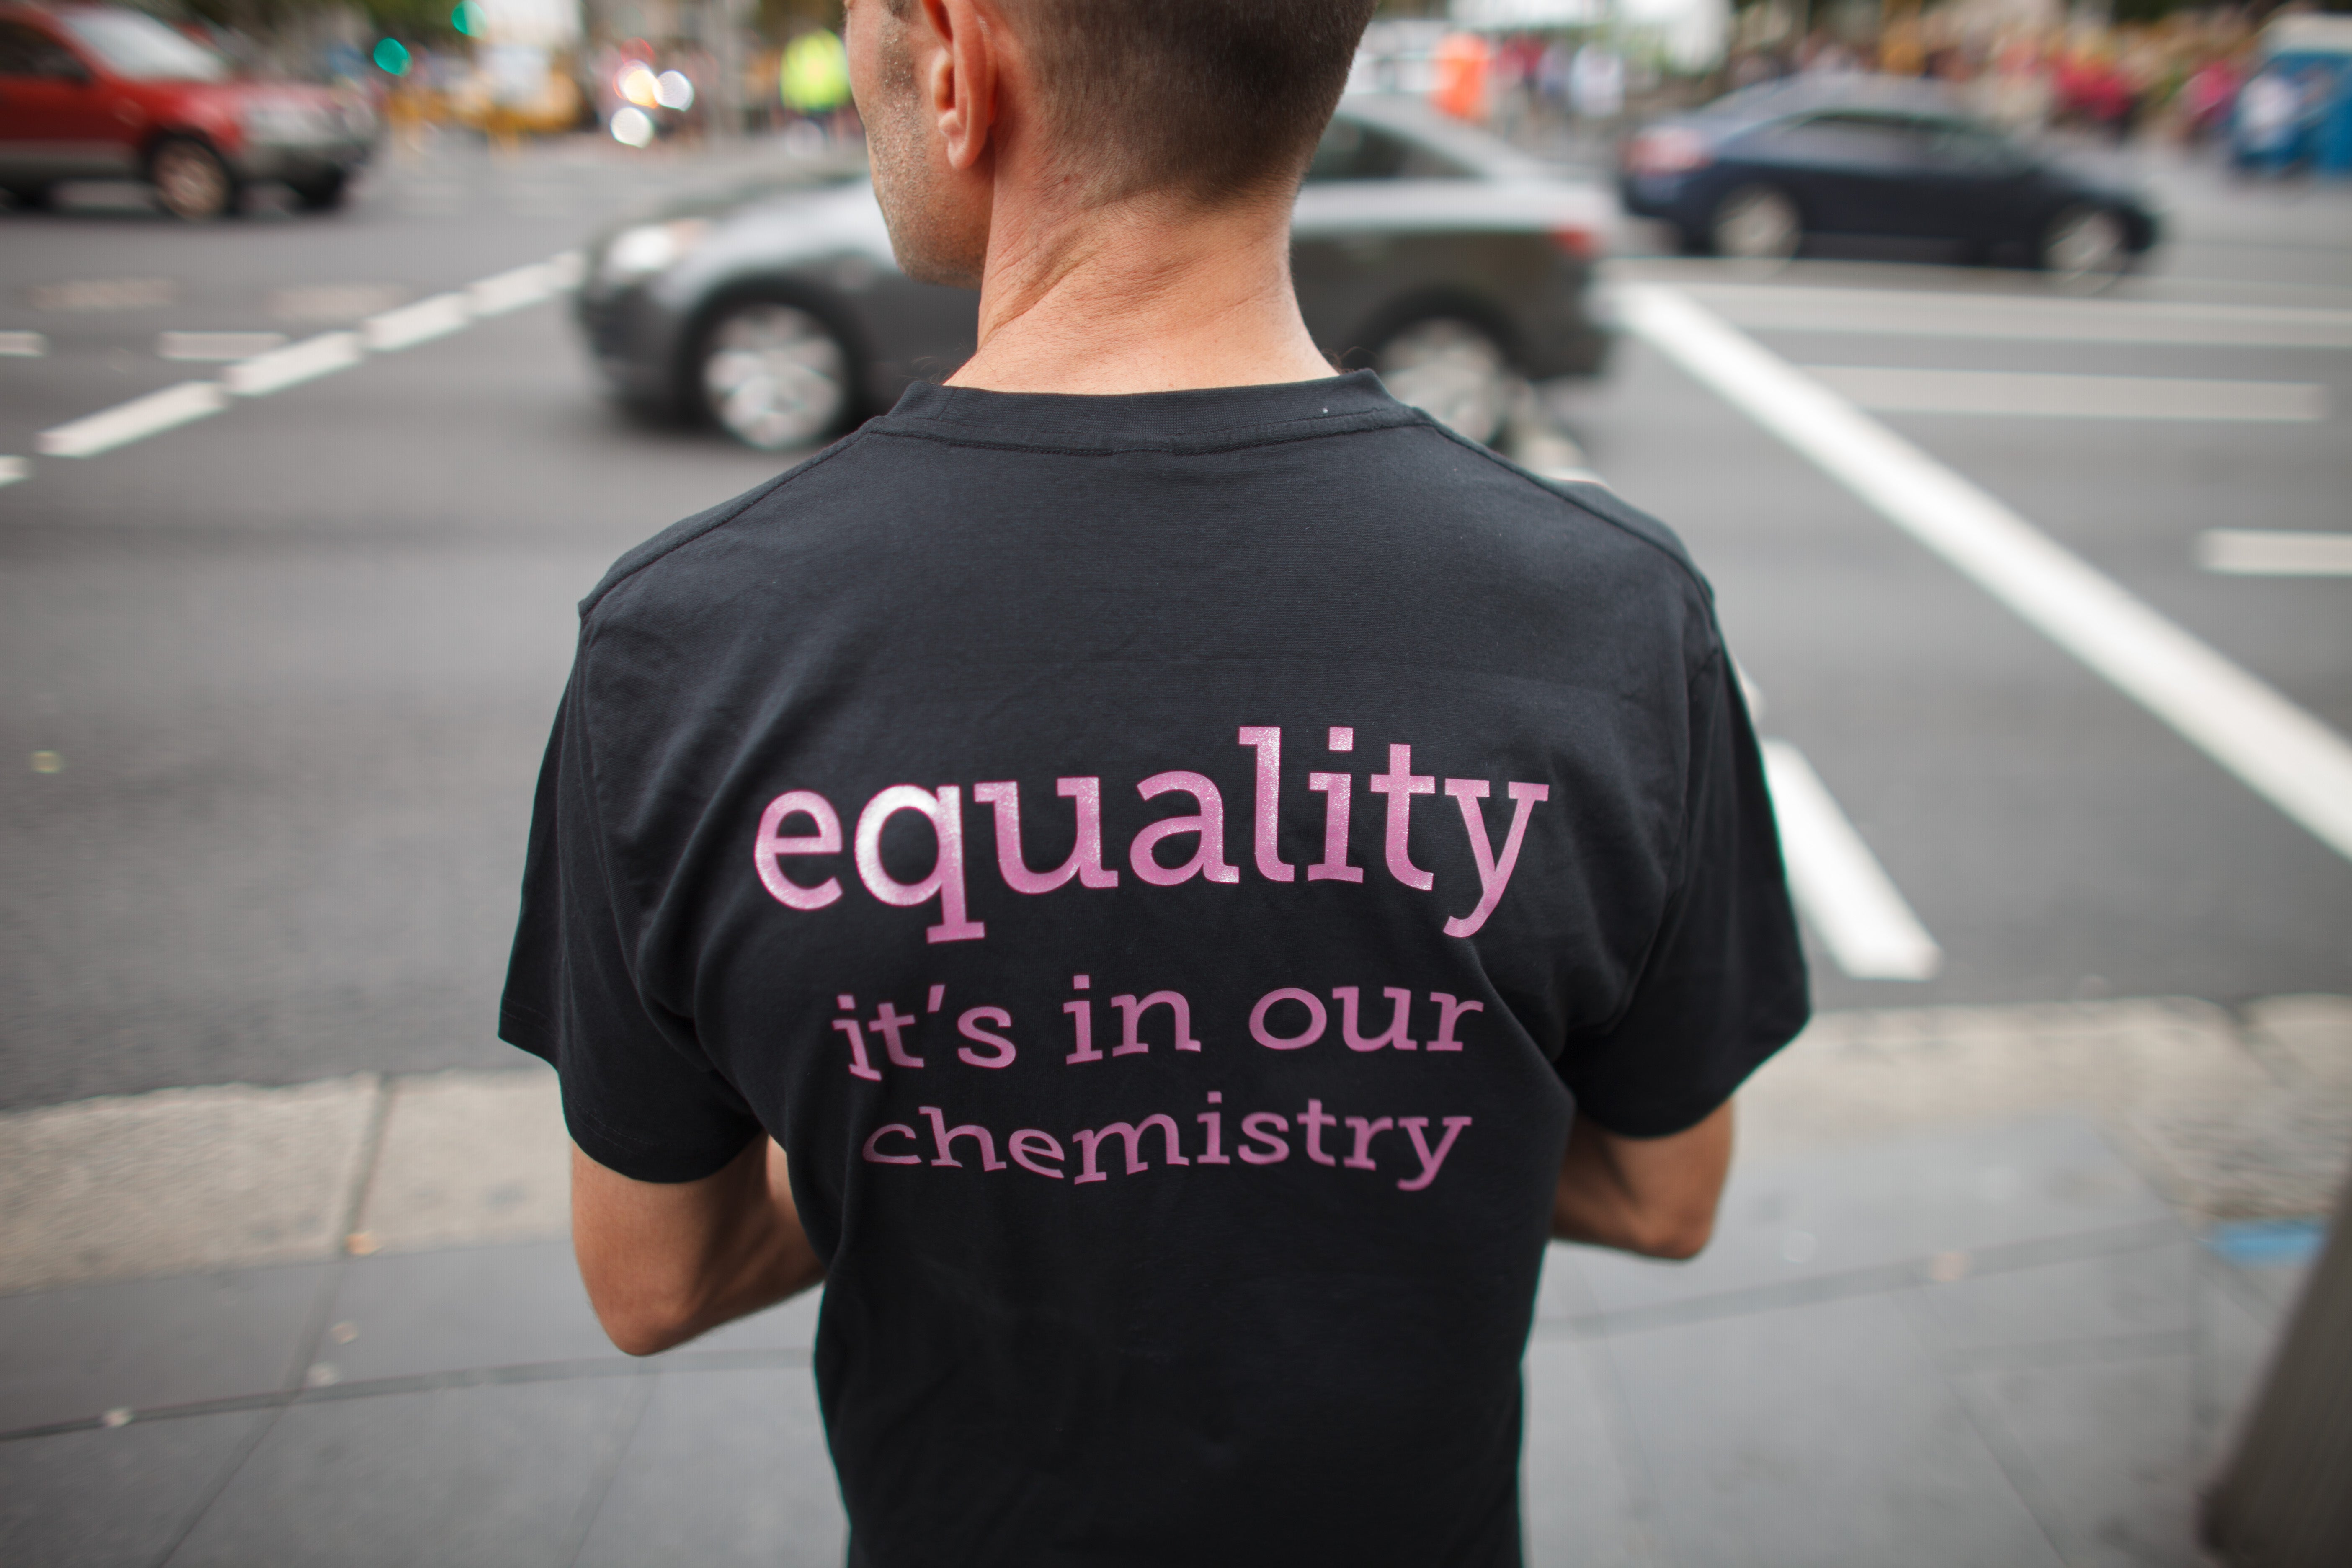 Equality - It's in our chemistry